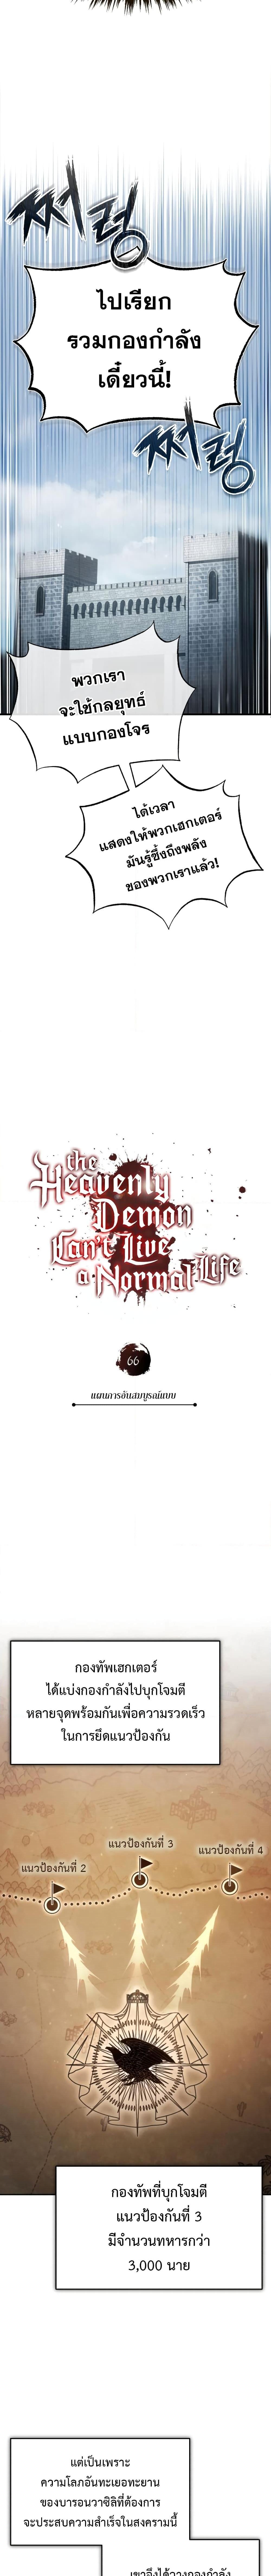 The Heavenly Demon Can’t Live a Normal Life 66 03